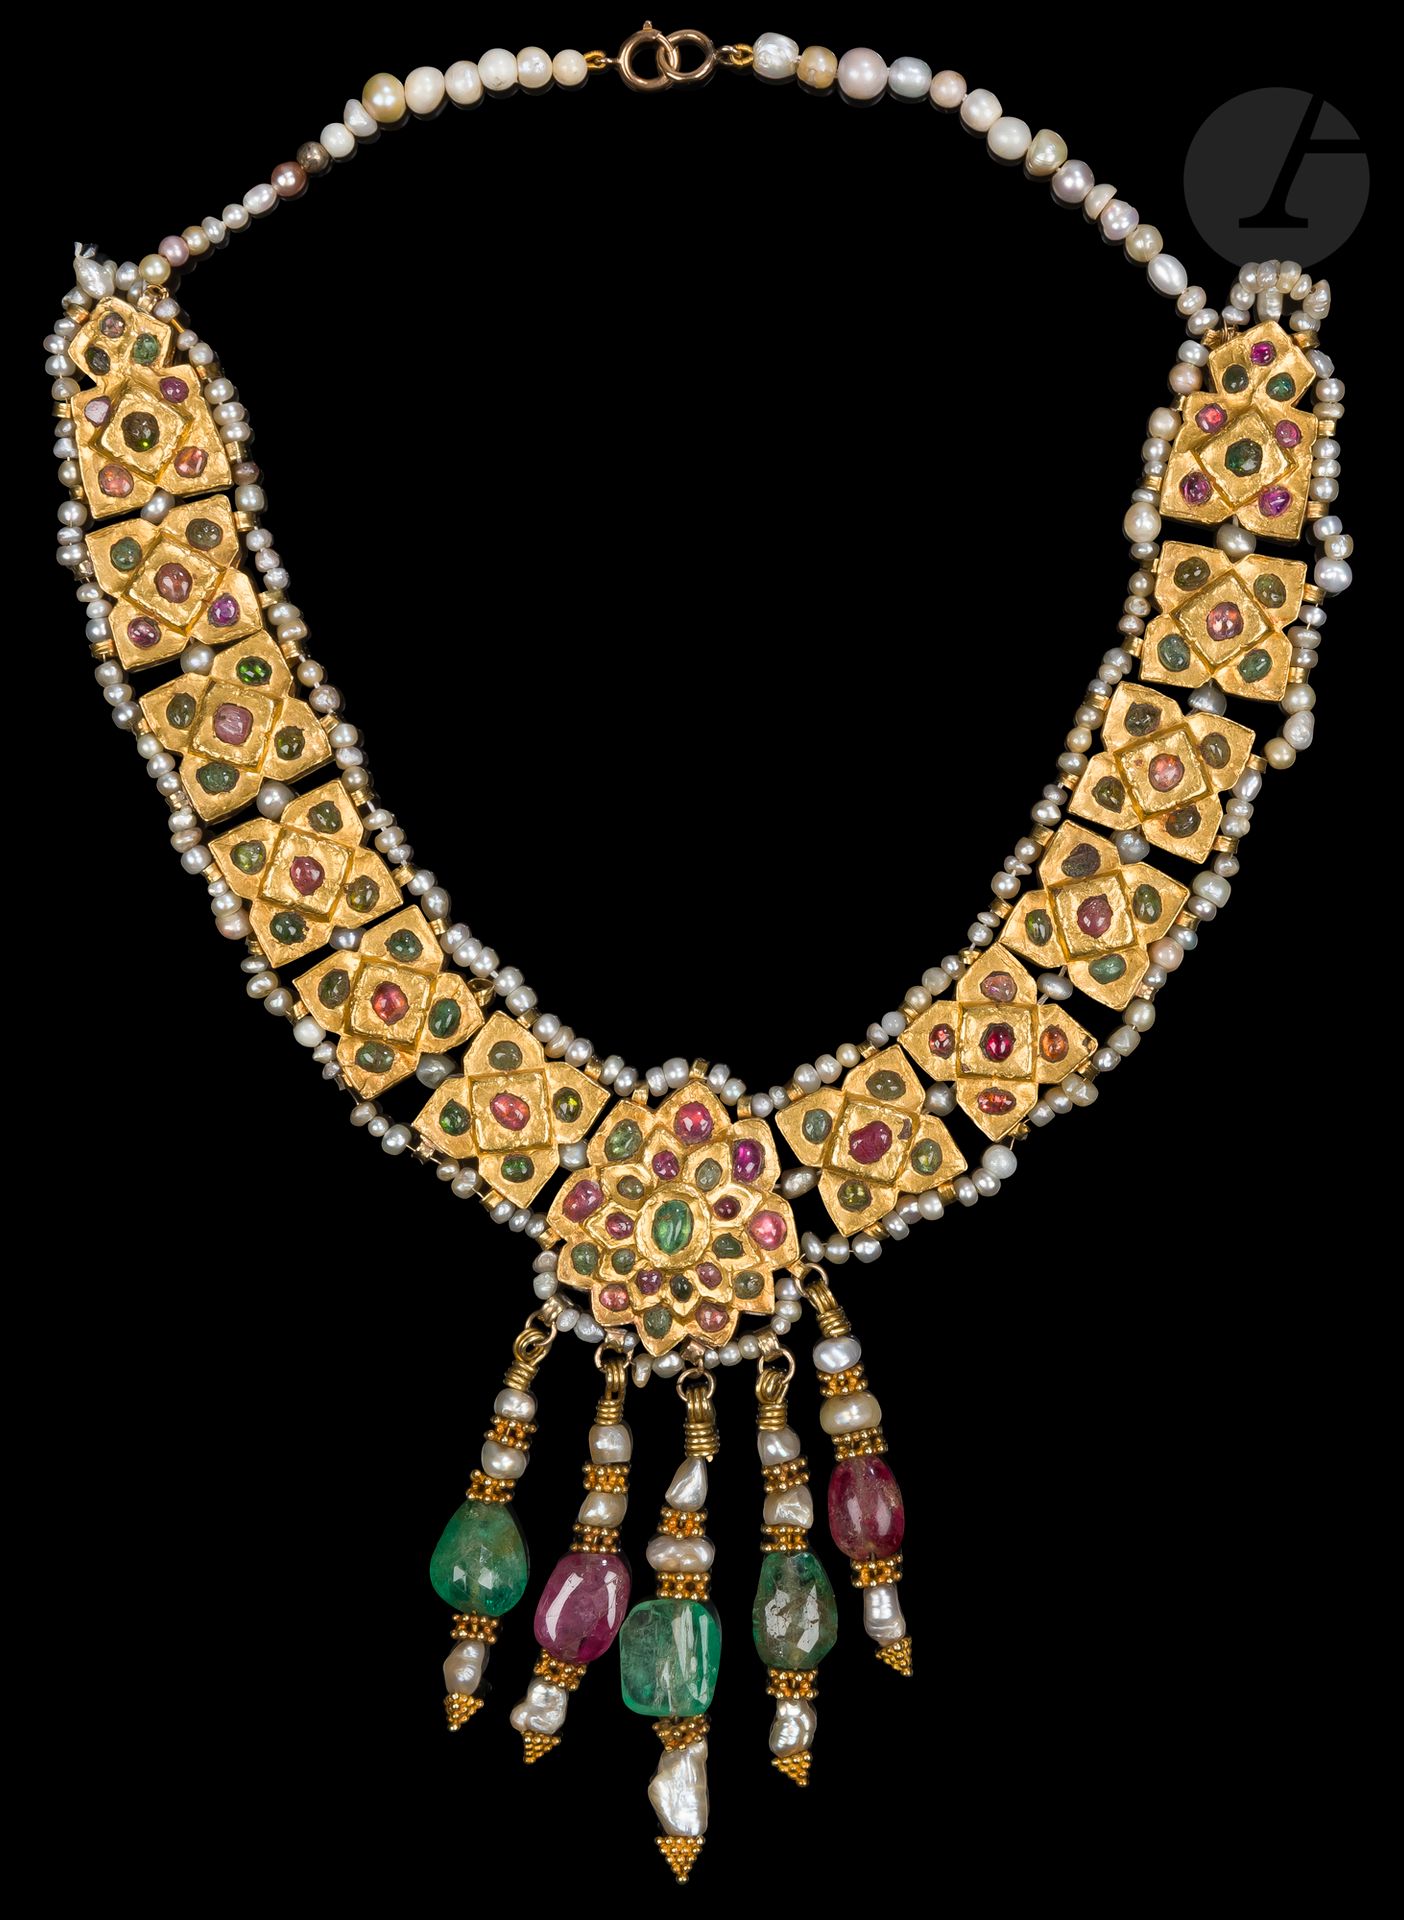 Null Necklace in 18K gold (750 / 1000), pearls and gems, Uzbekistan, probably Bu&hellip;